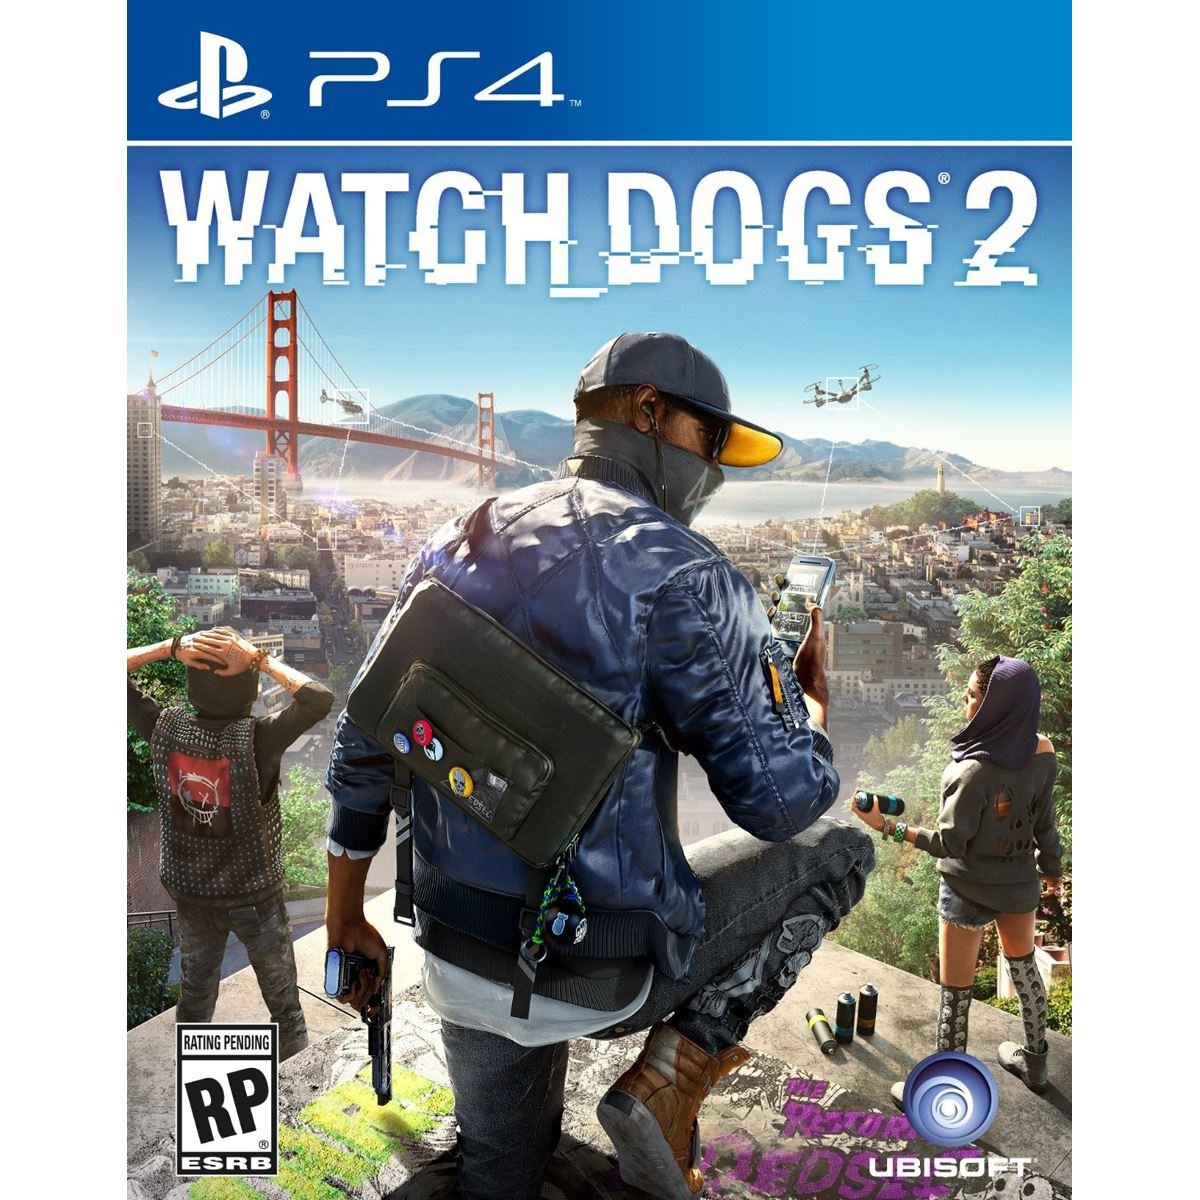 PS4 Watch Dogs 2 Limited